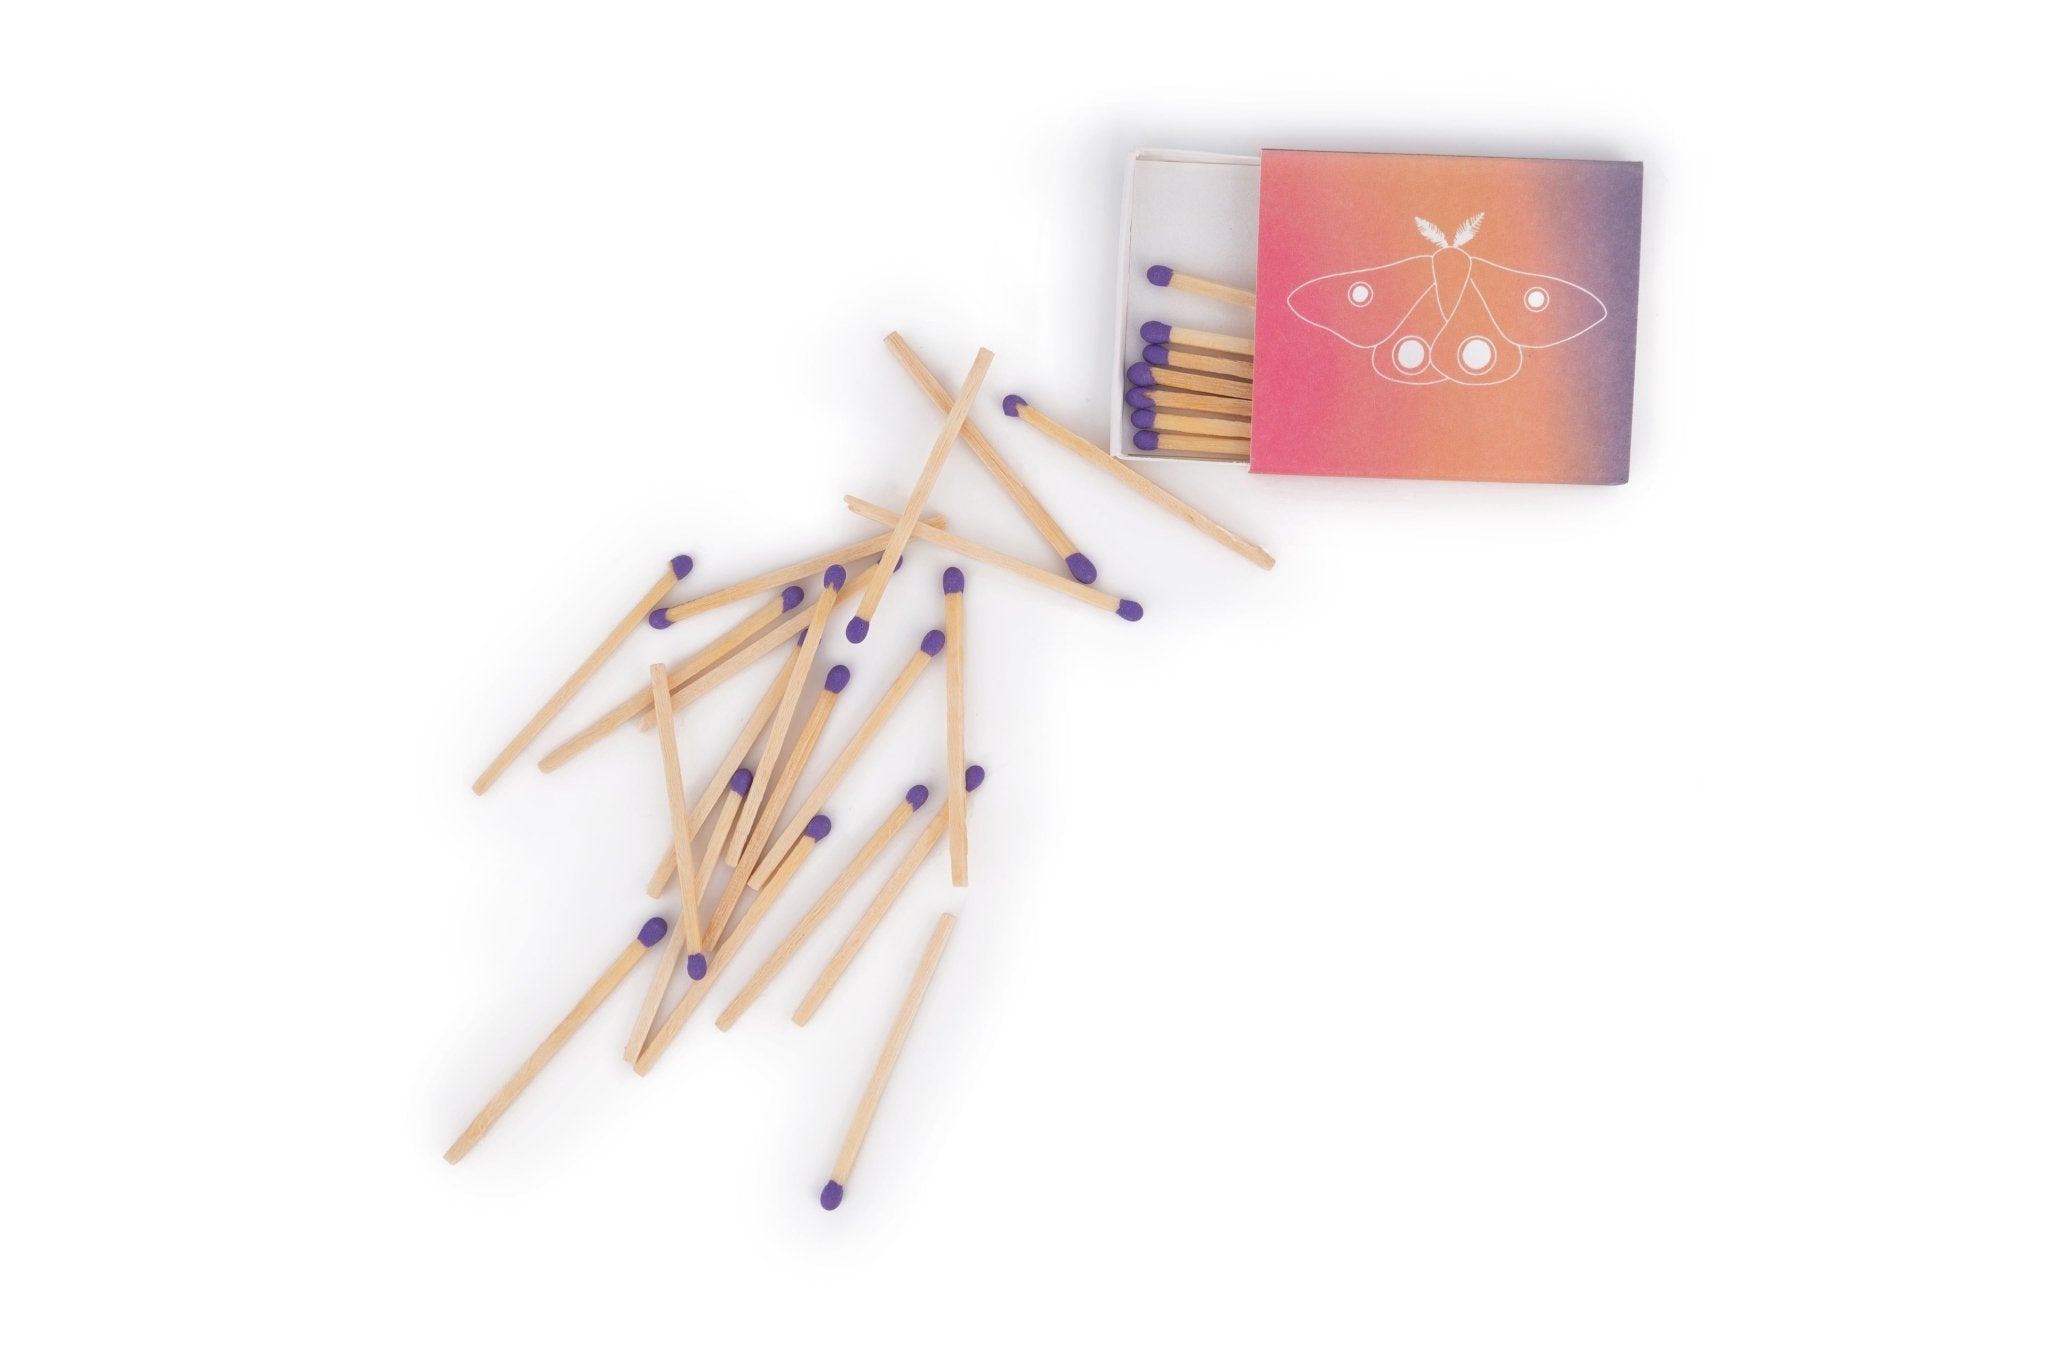 Adelfi matchbox open with purple matches spilling out